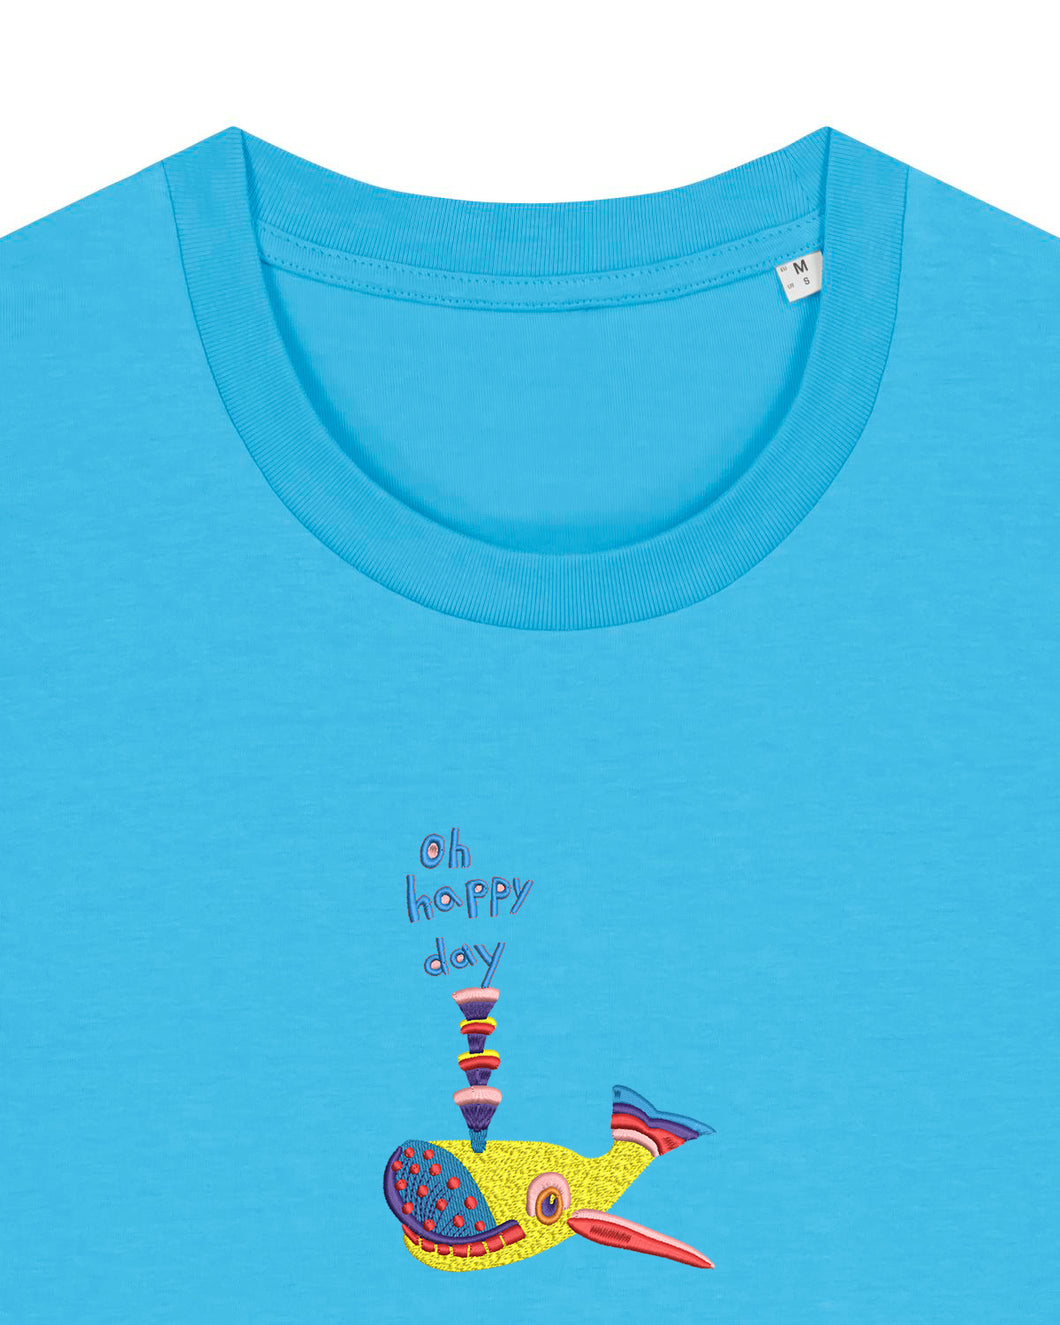 Oh happy day! 🐳- Embroidered unisex T-shirt